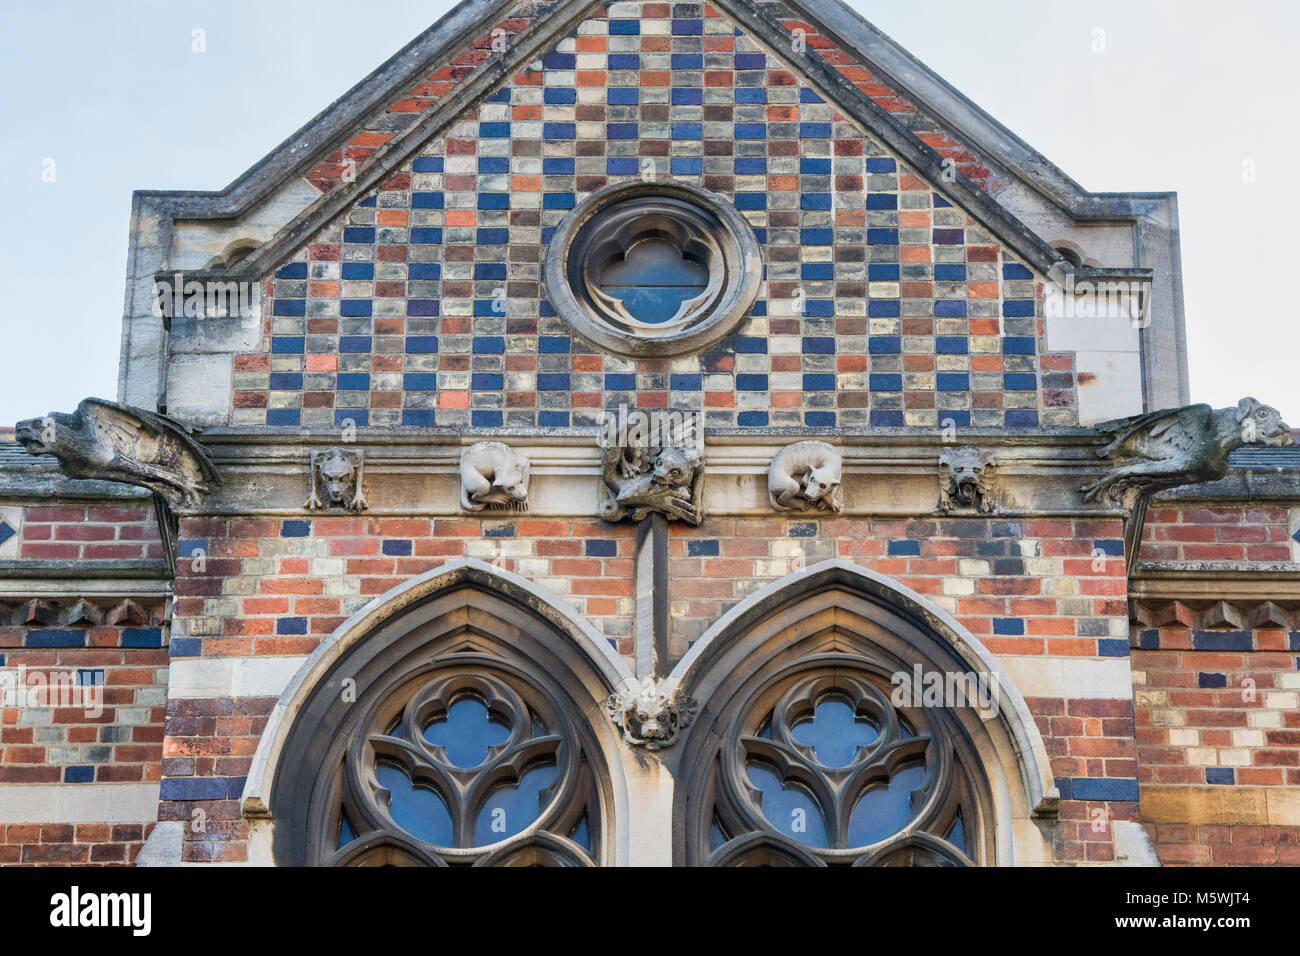 Carved stone gargoyles / grotesques on Keble college building. Oxford, Oxfordshire, England Stock Photo